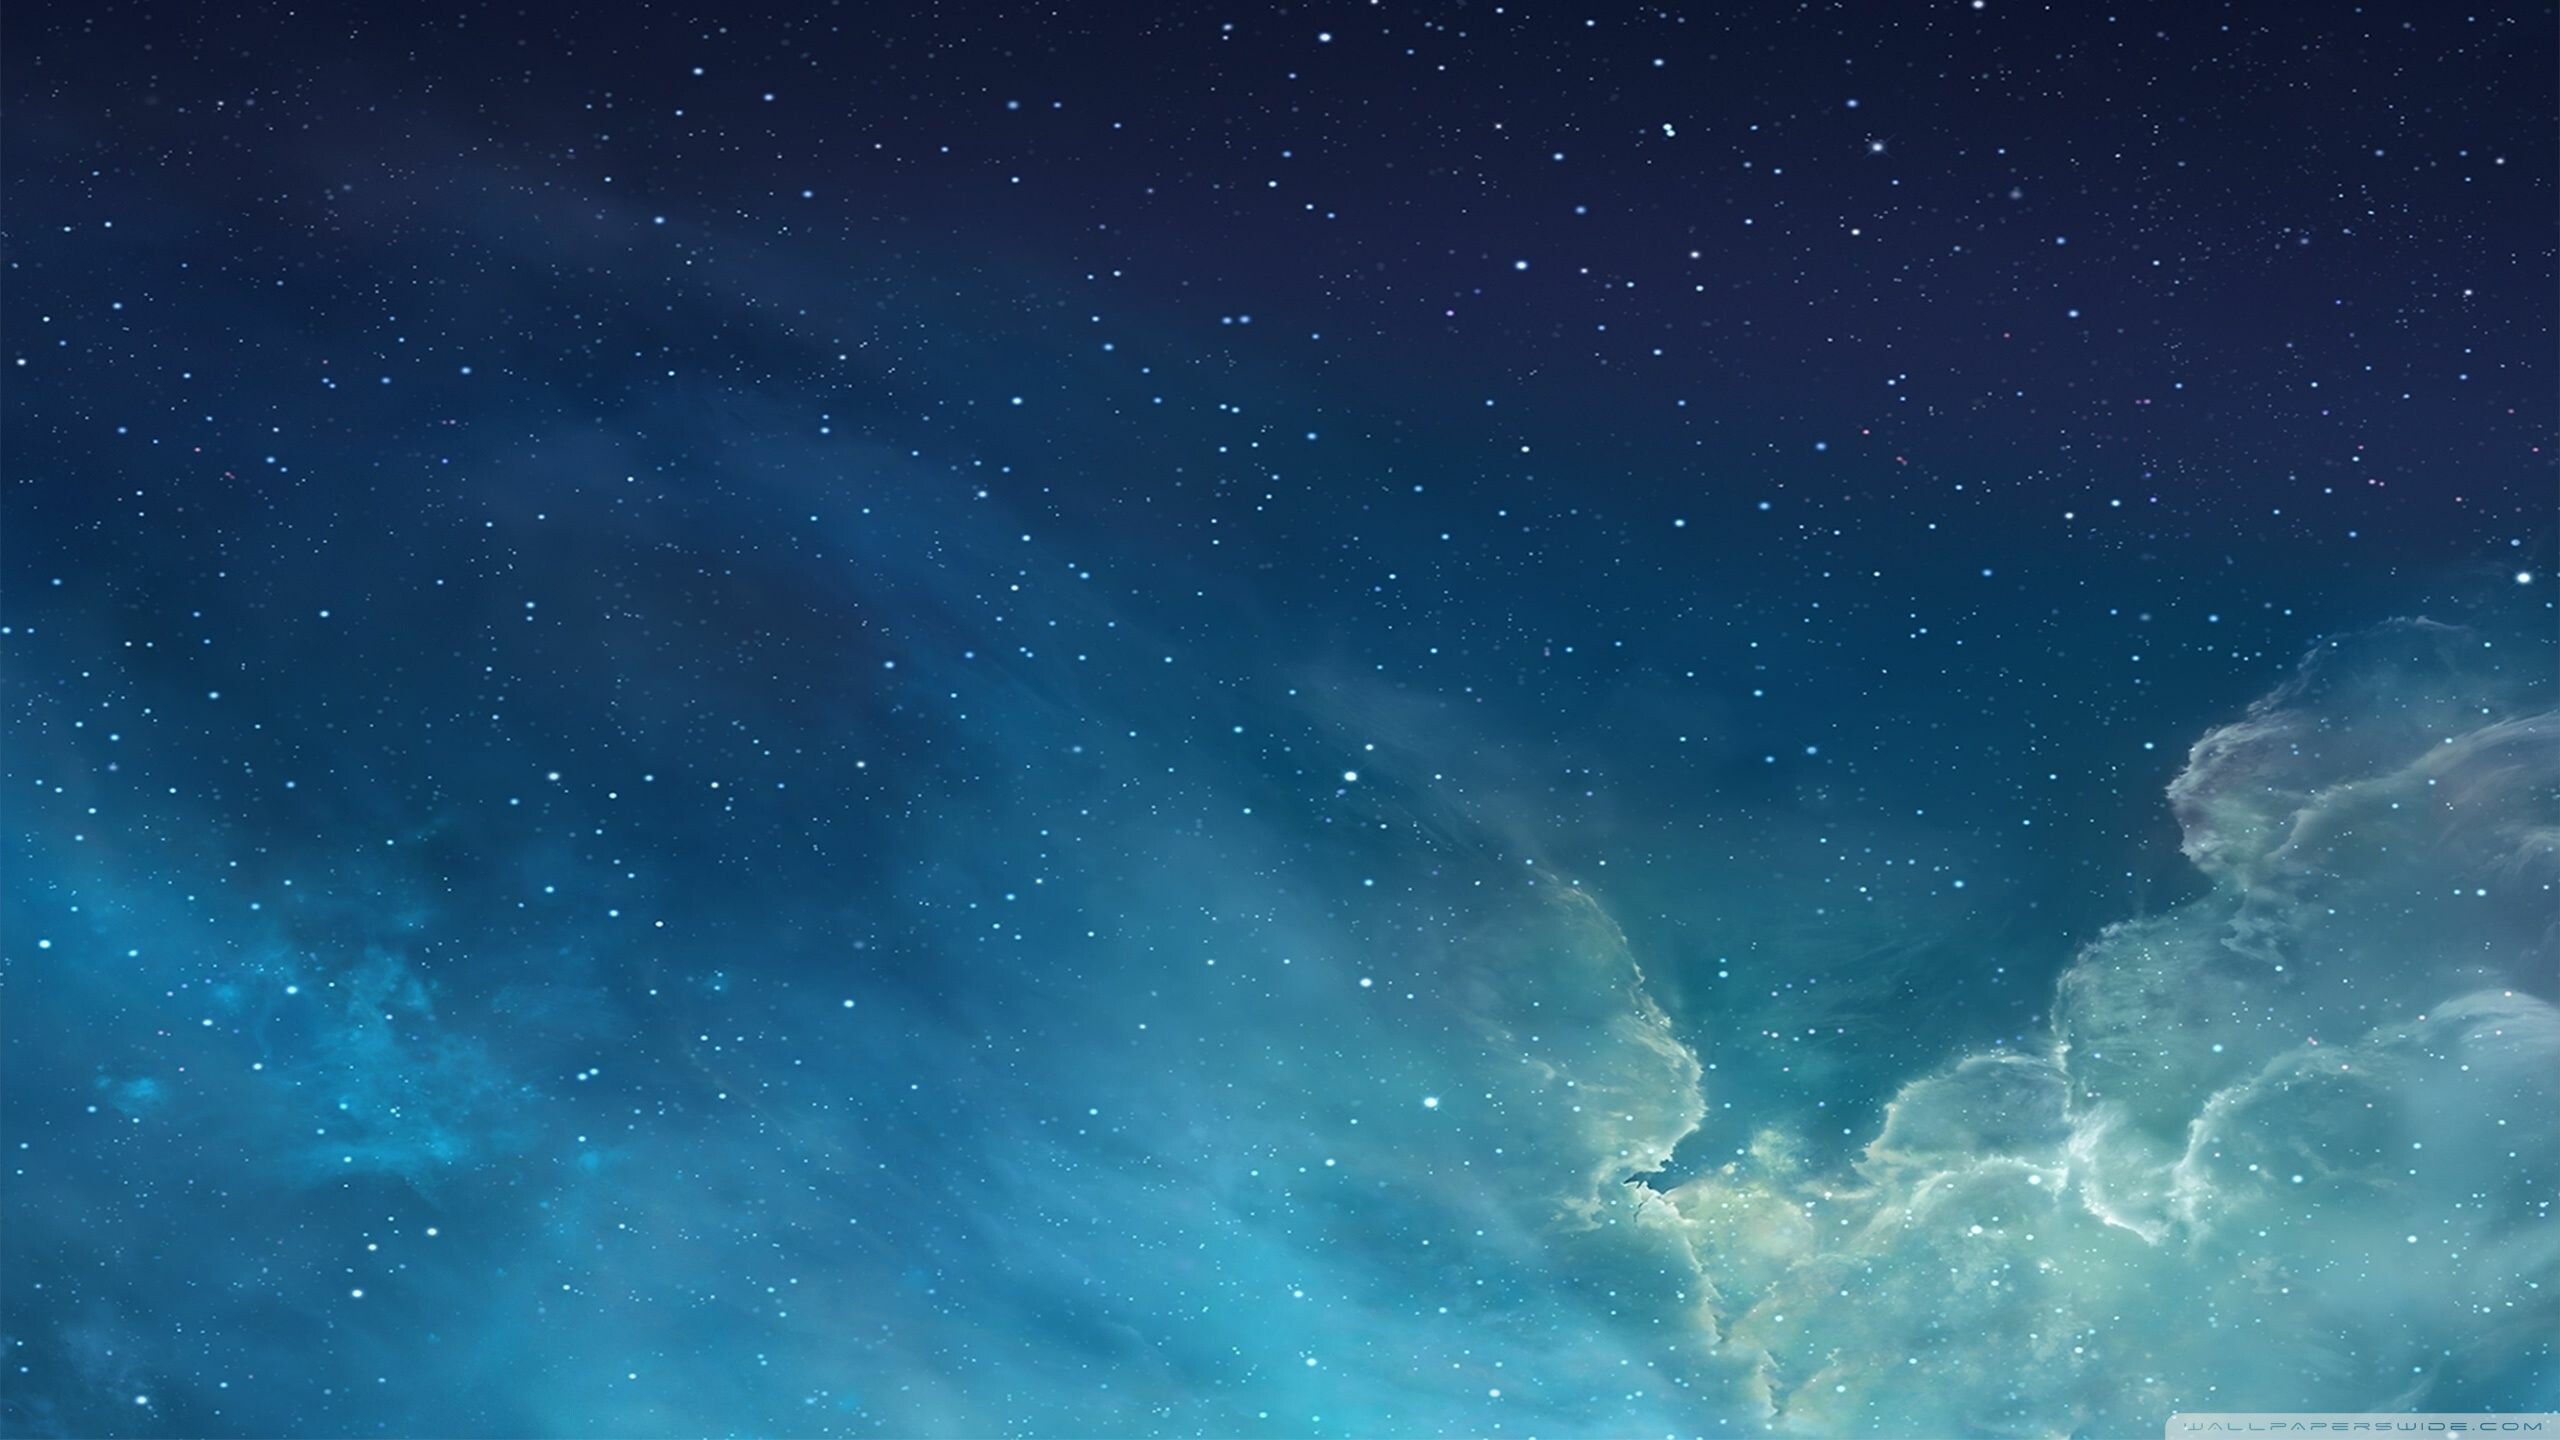 92+ Galaxy Wallpapers: HD, 4K, 5K for PC and Mobile | Download free